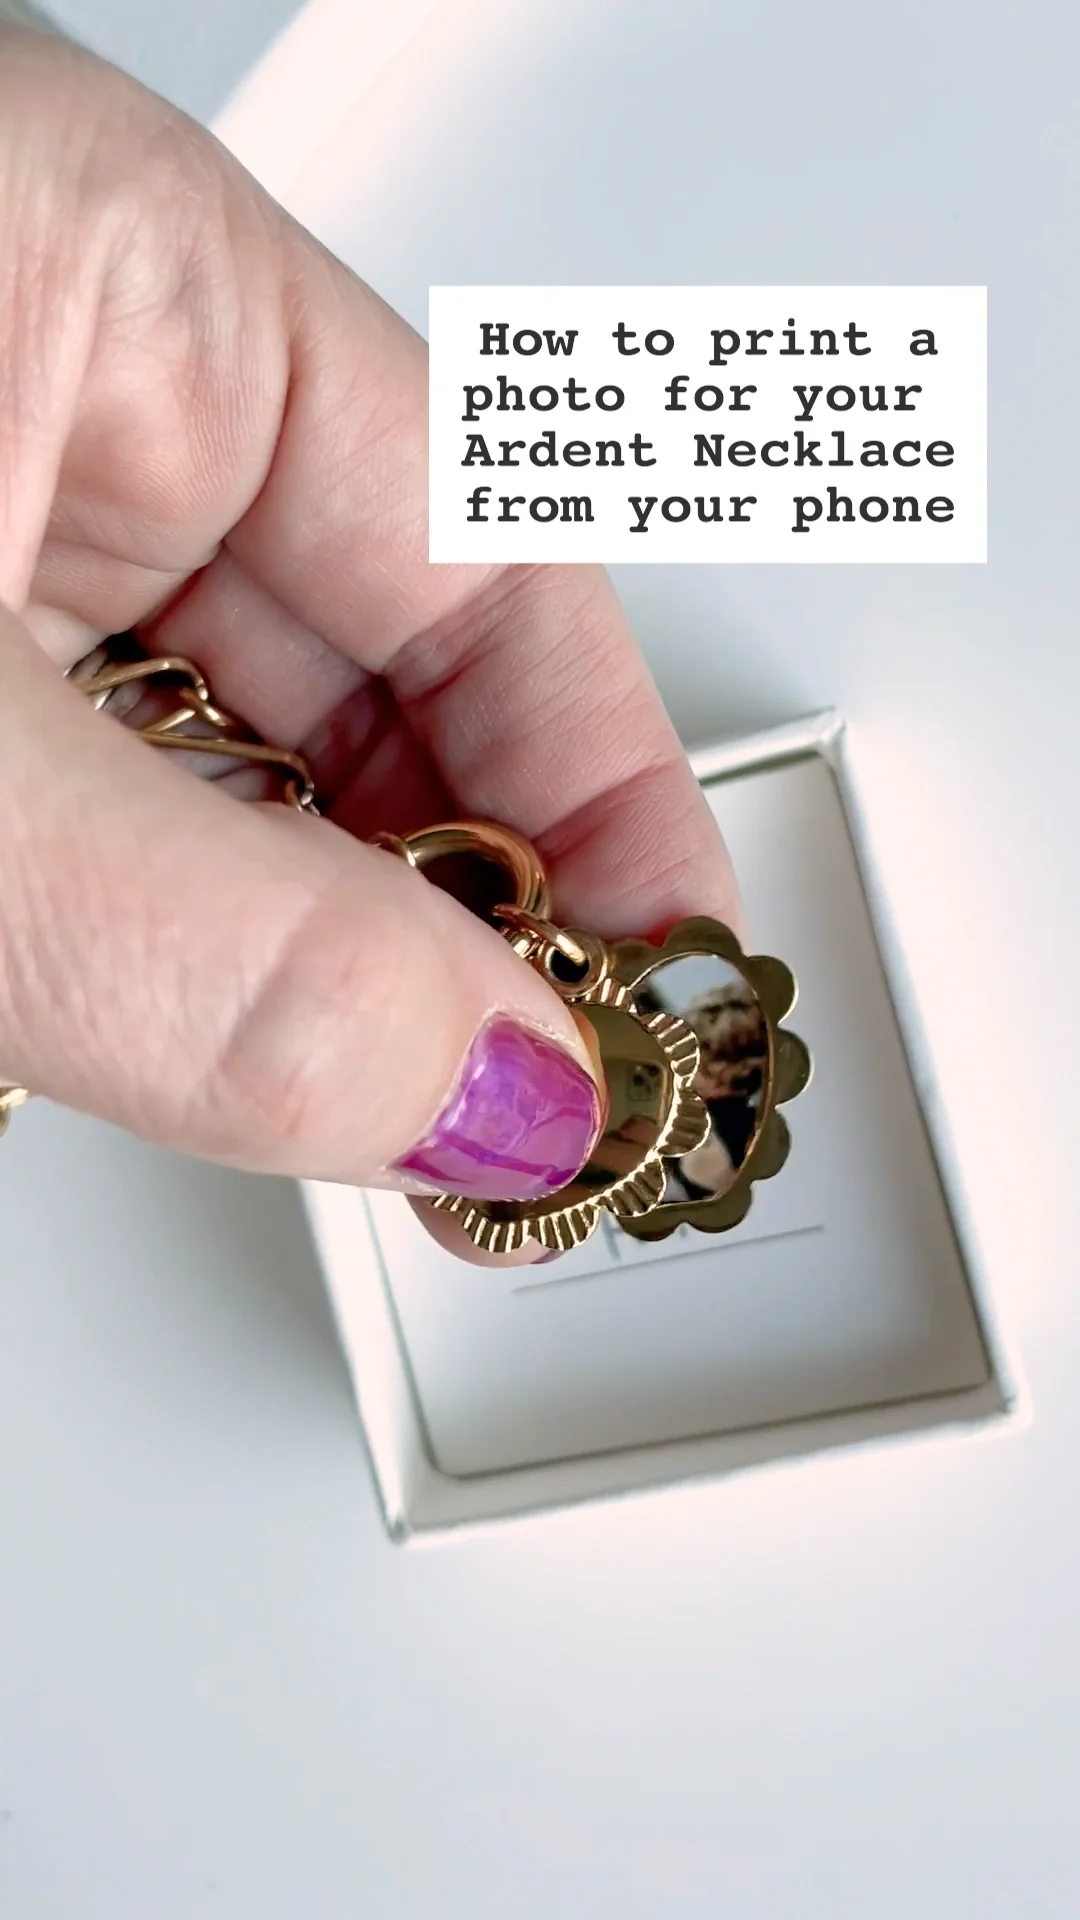 Ardent Necklace